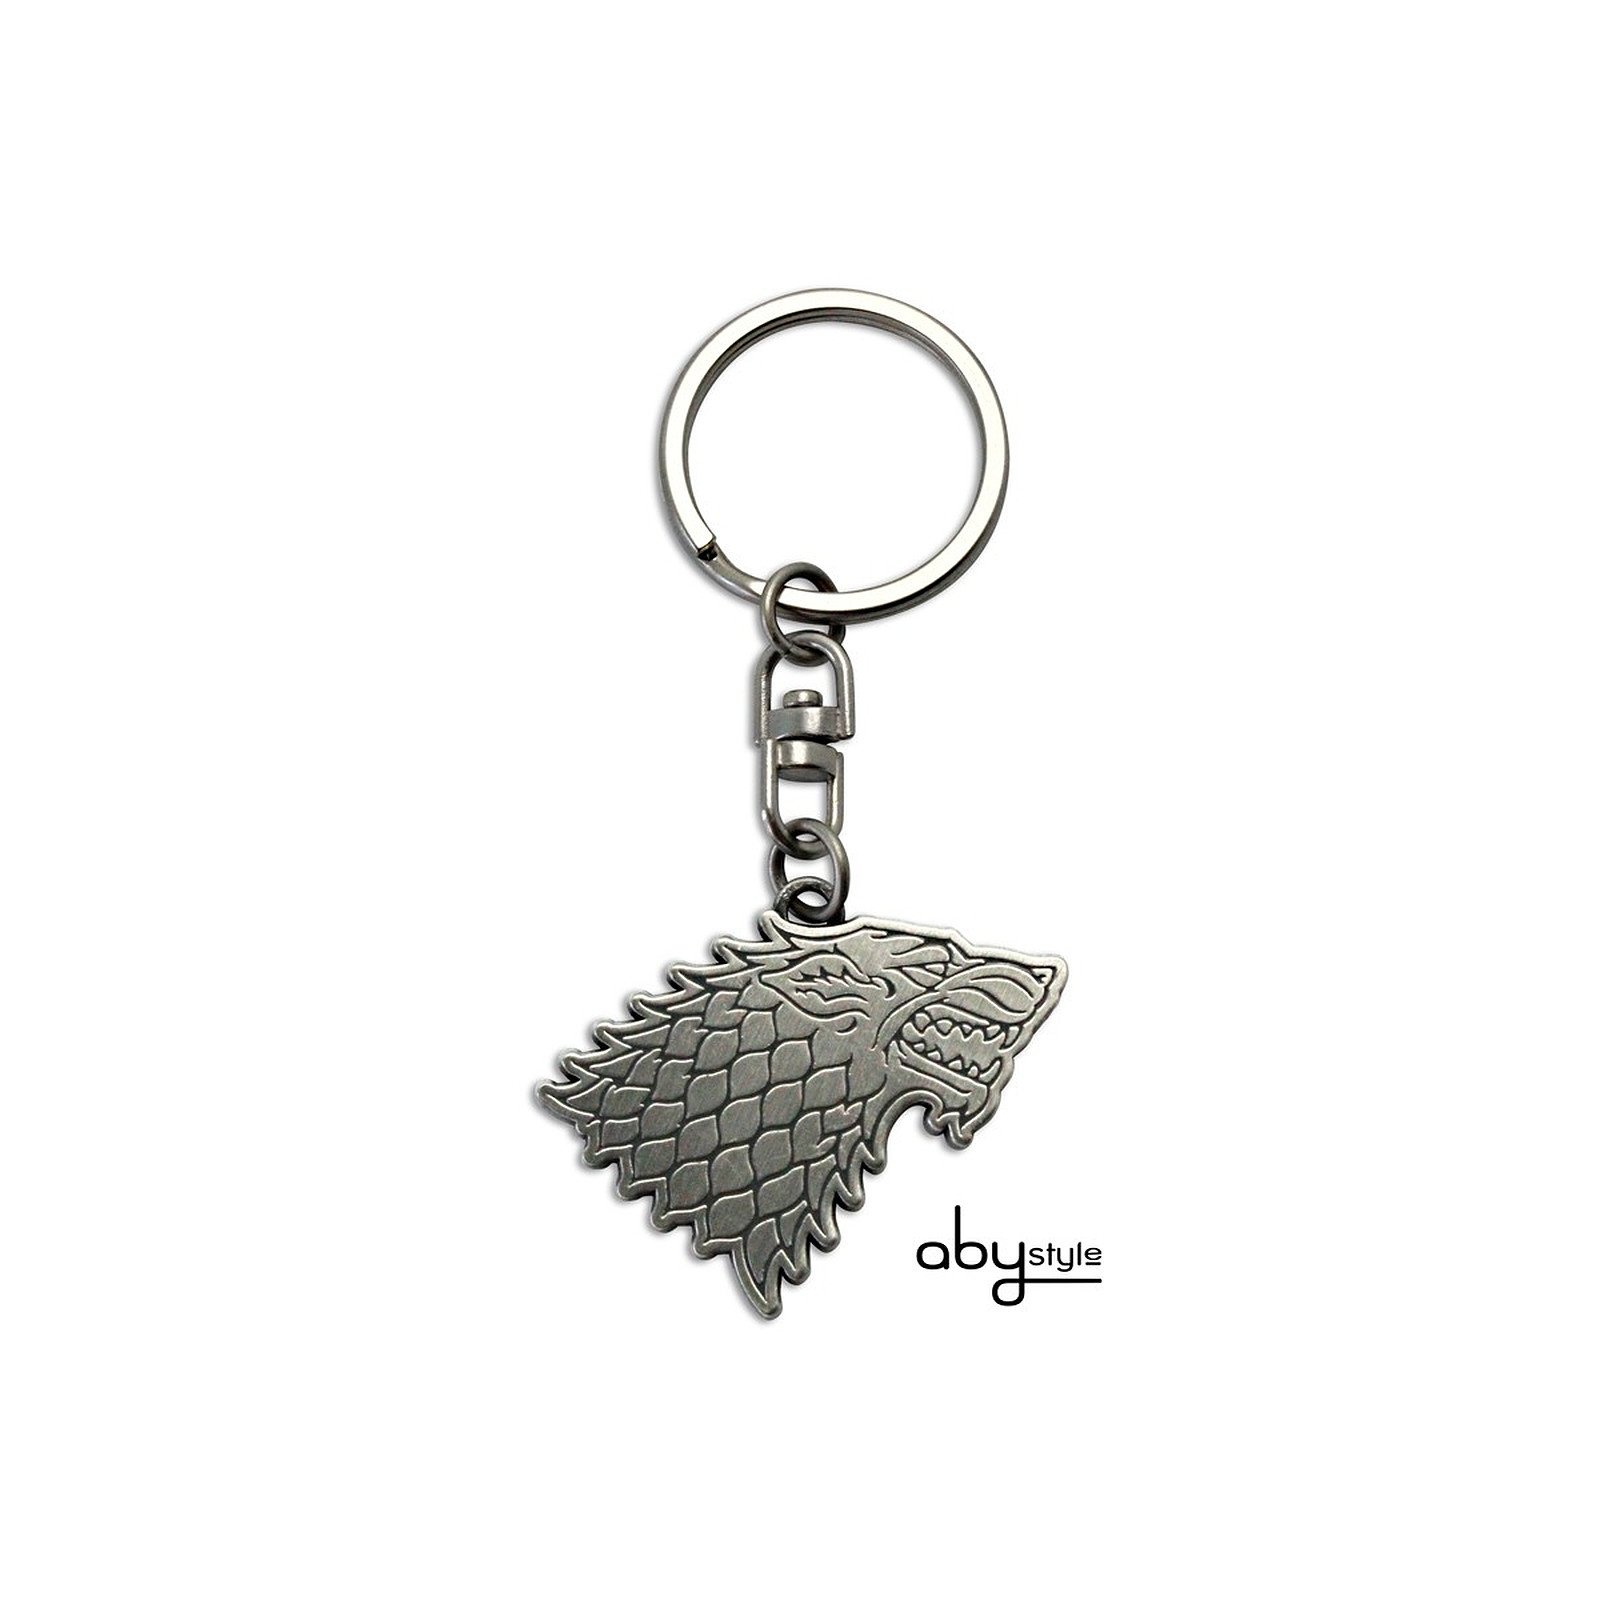 GAME OF THRONES - Porte-cles Stark - Porte-cles Abystyle